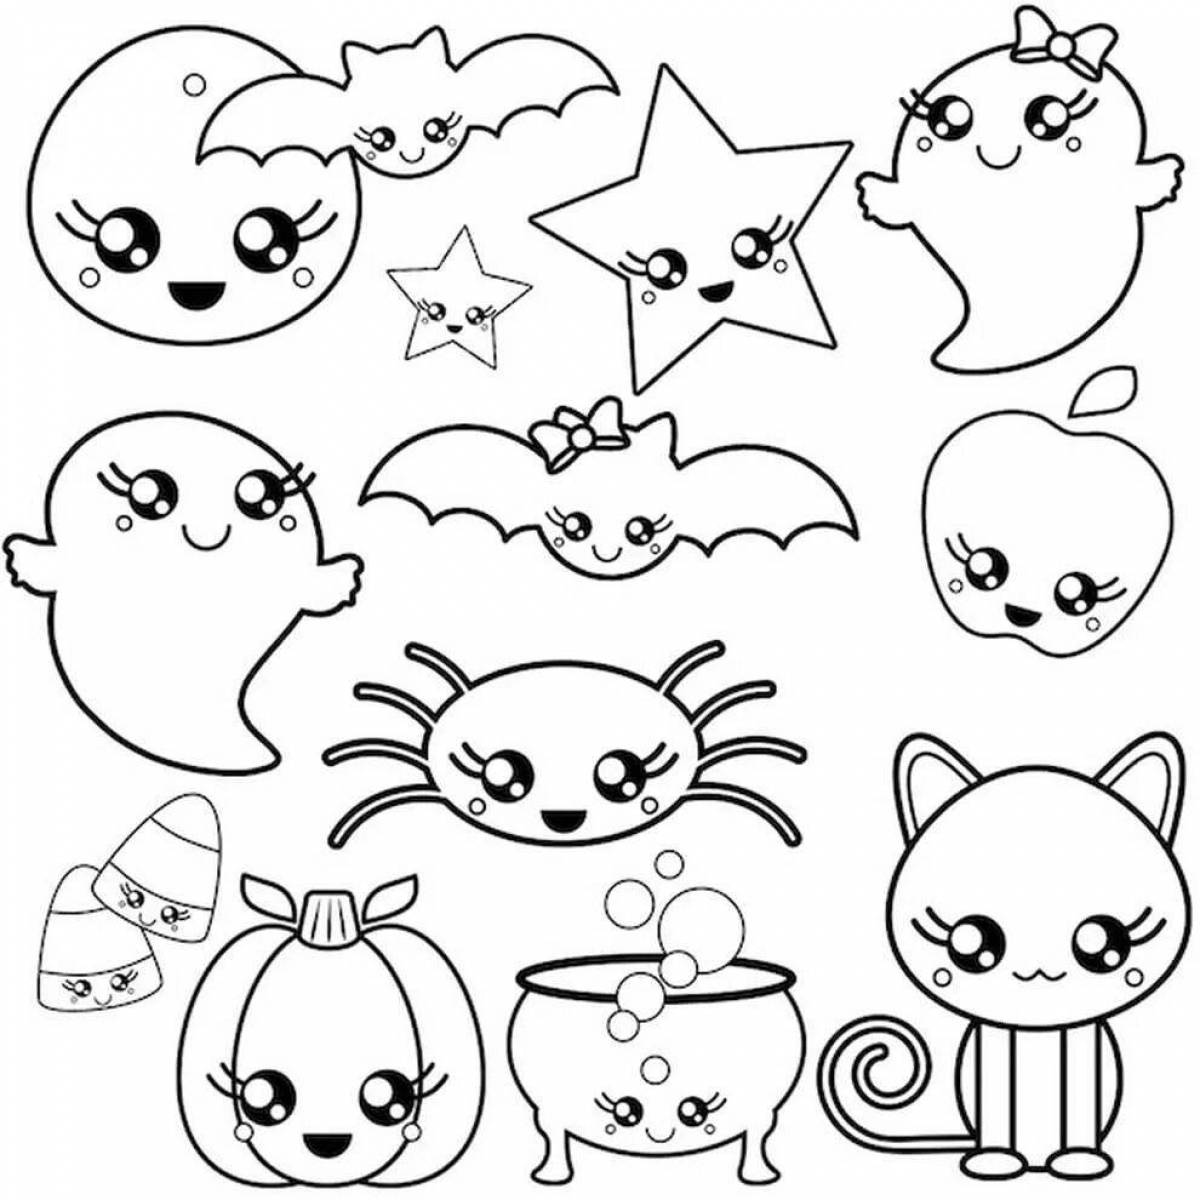 Cute coloring pictures for stickers